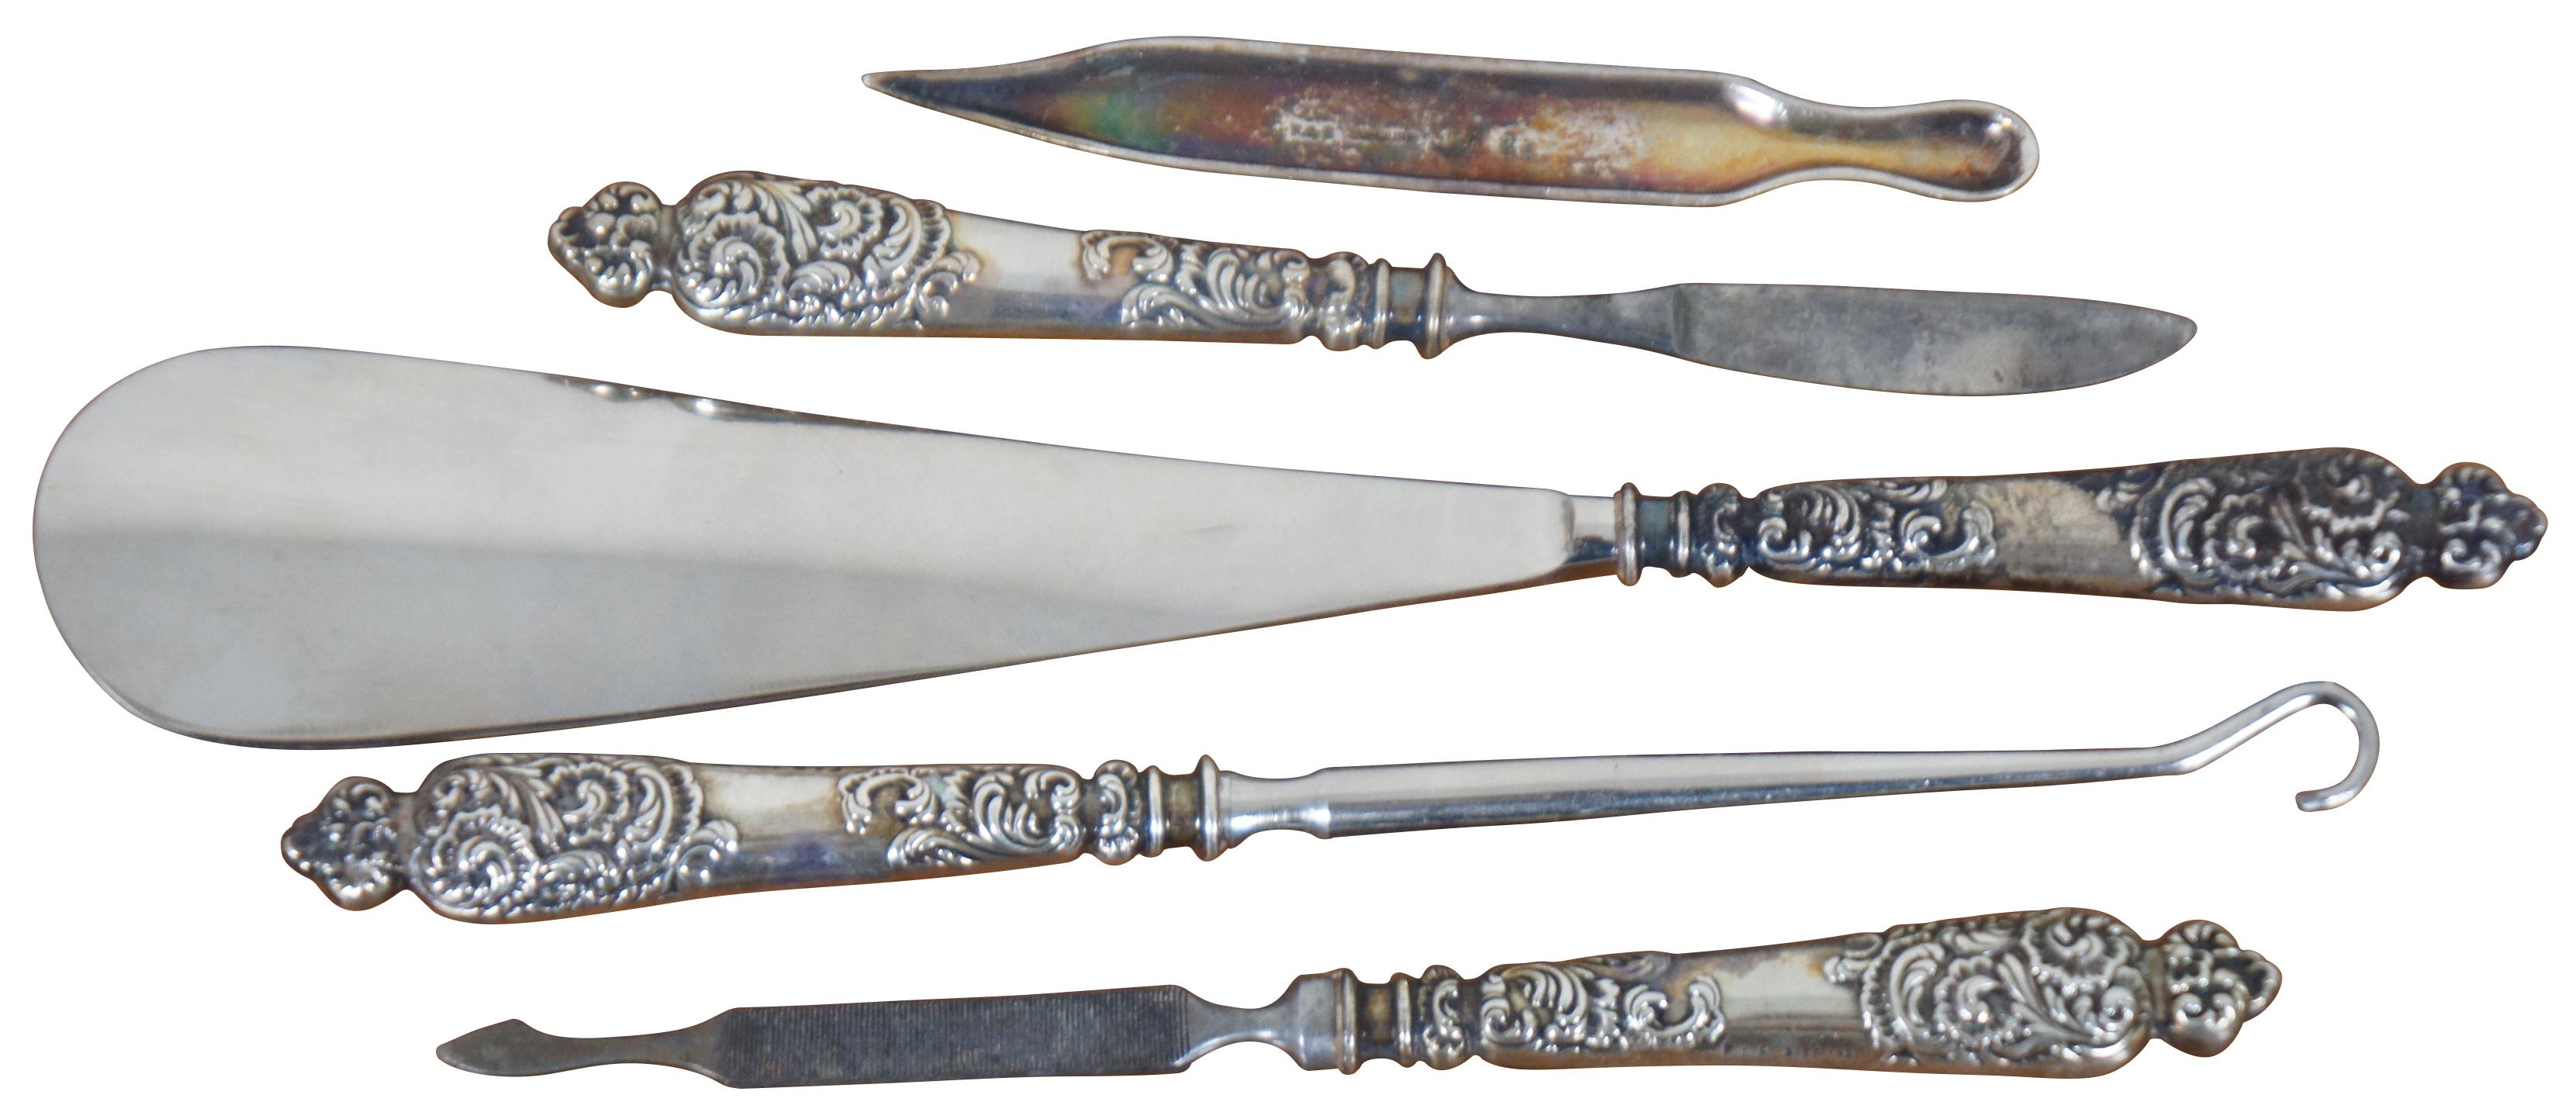 Early 20th century five piece vanity grooming set by Theodore W. Foster and Bros with art nouveau sterling silver handles, engraved with an M. Set includes a shoe horn, nail file, button hook, corn knife, and cuticle pusher. “Providence, RI -